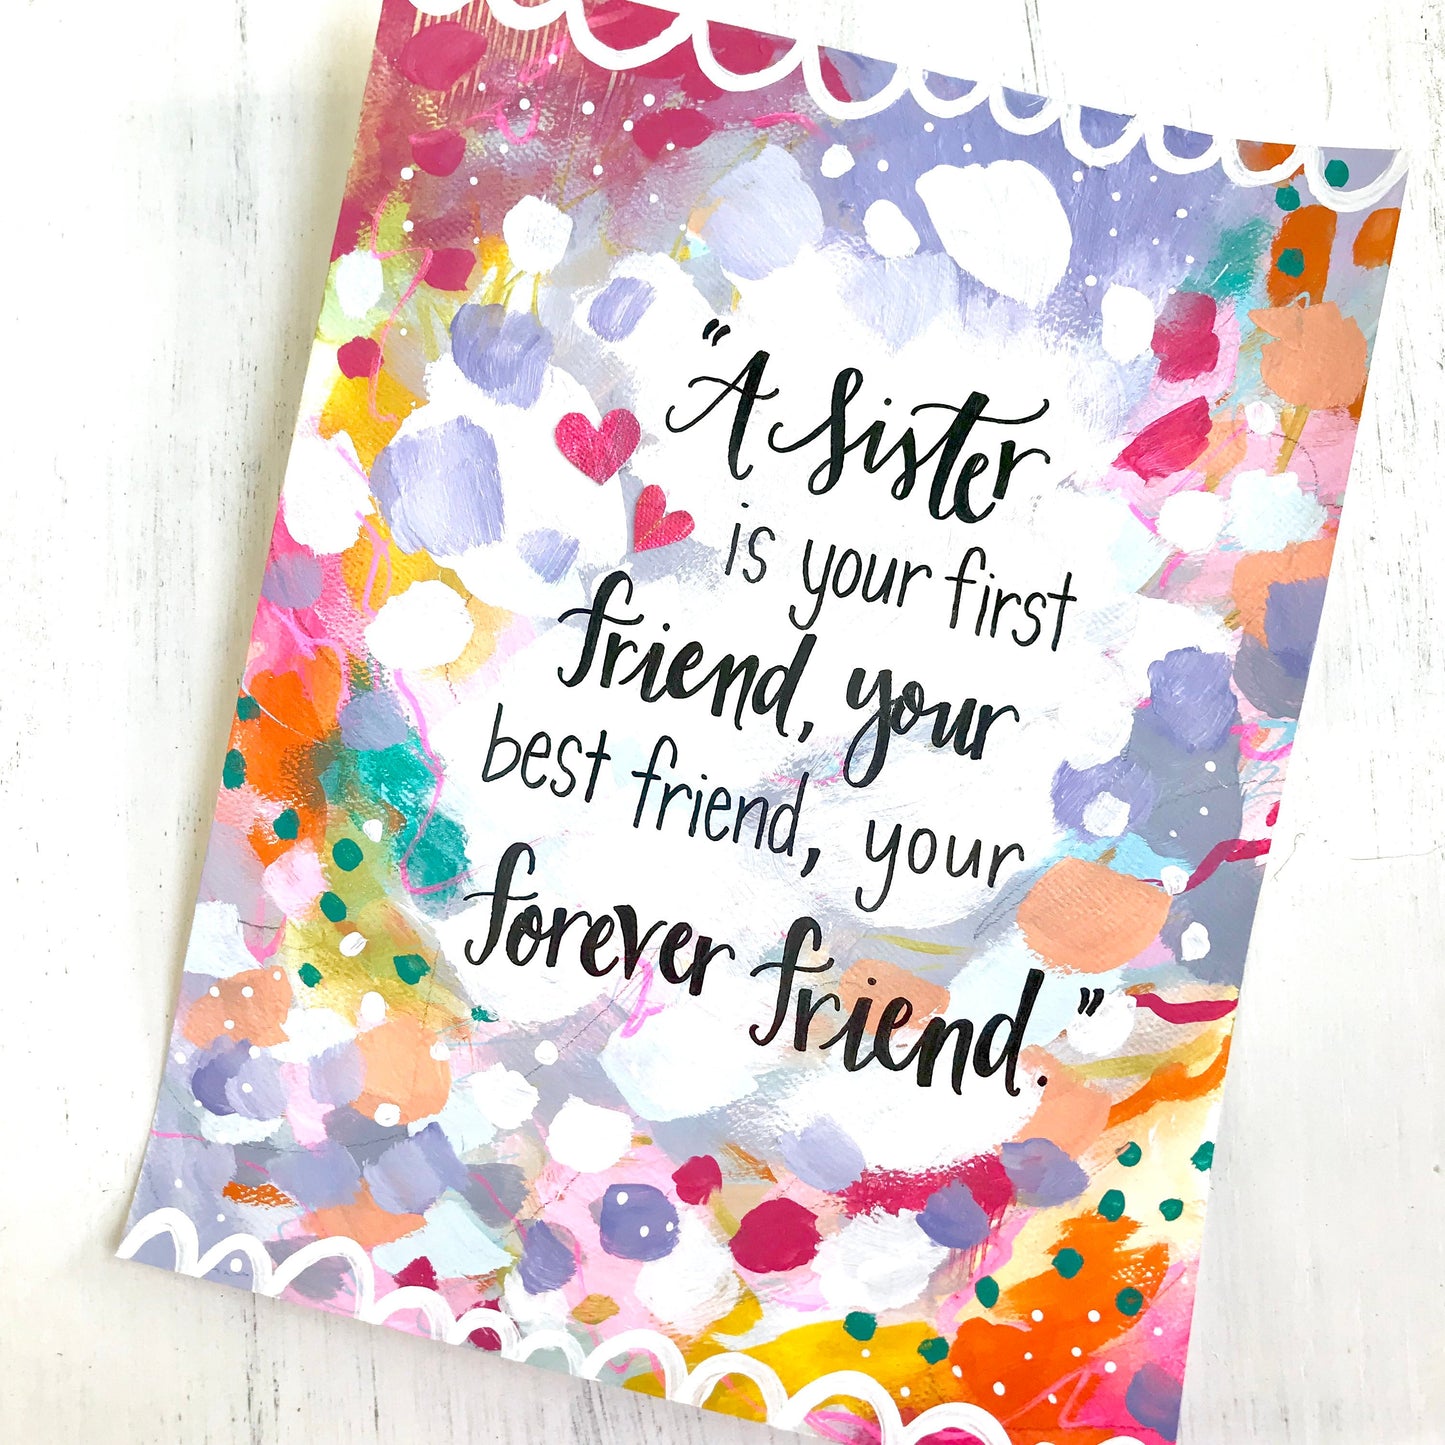 Inspirational Art Print 8.5x11 inches / Sister and Friend / Gift for Sister / Sister's Friendship / Best Sister Ever / Gift for her - Bethany Joy Art